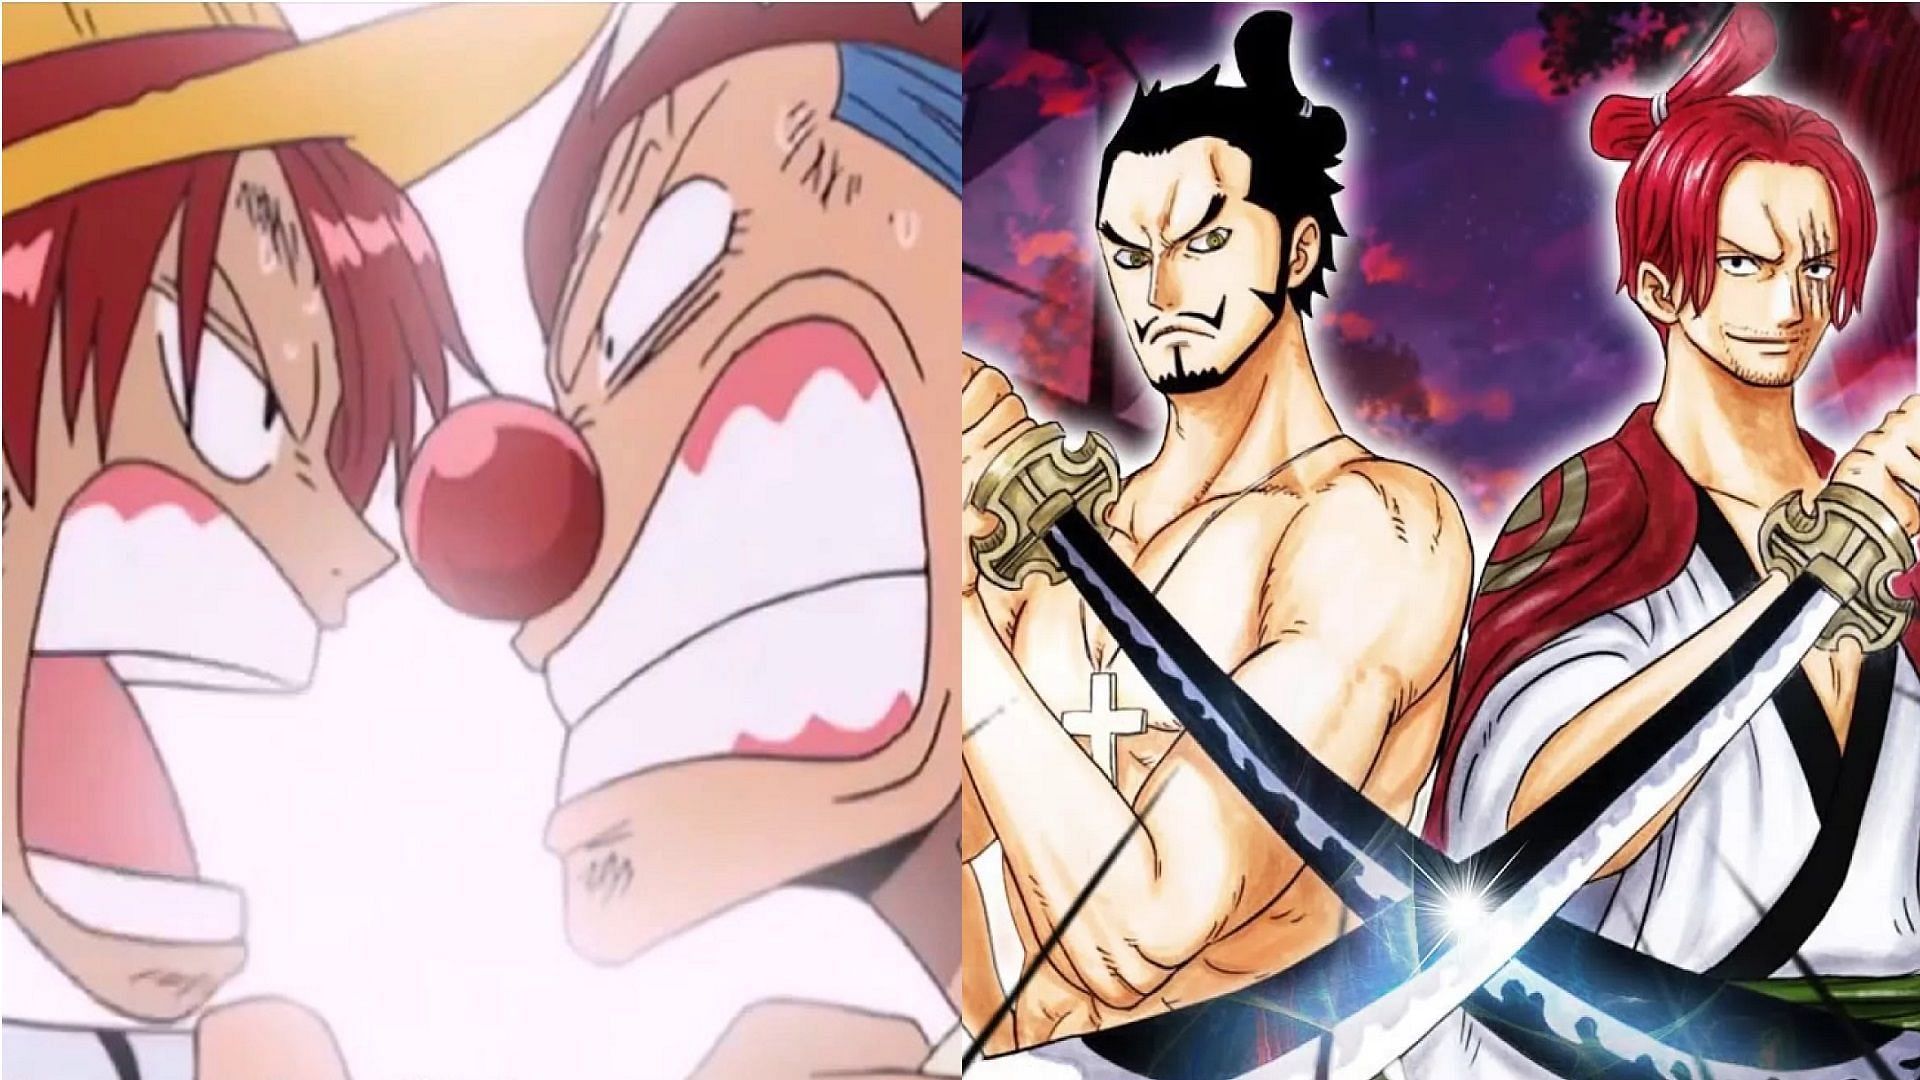 In the One Piece series, rivalries need to be properly contextualized (Image via Eiichiro Oda/Shueisha, One Piece)